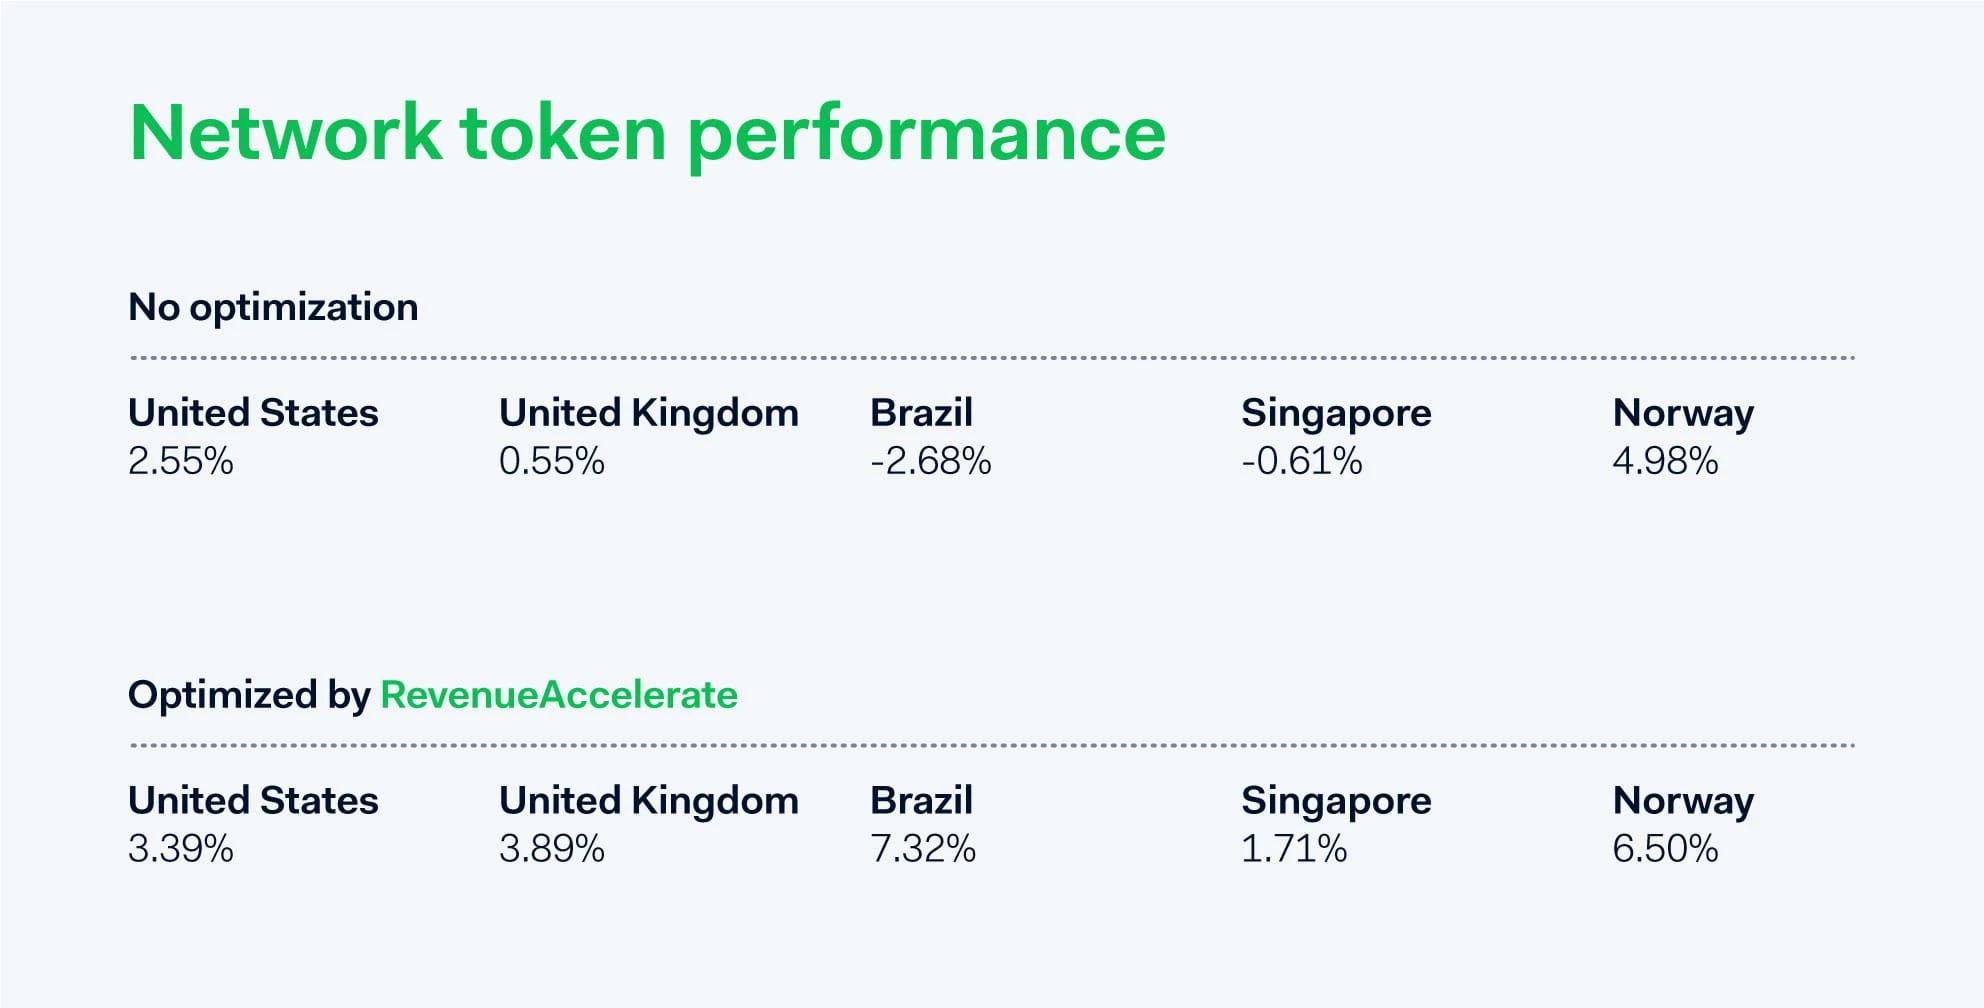 Network token performance with RevenueAccelerate